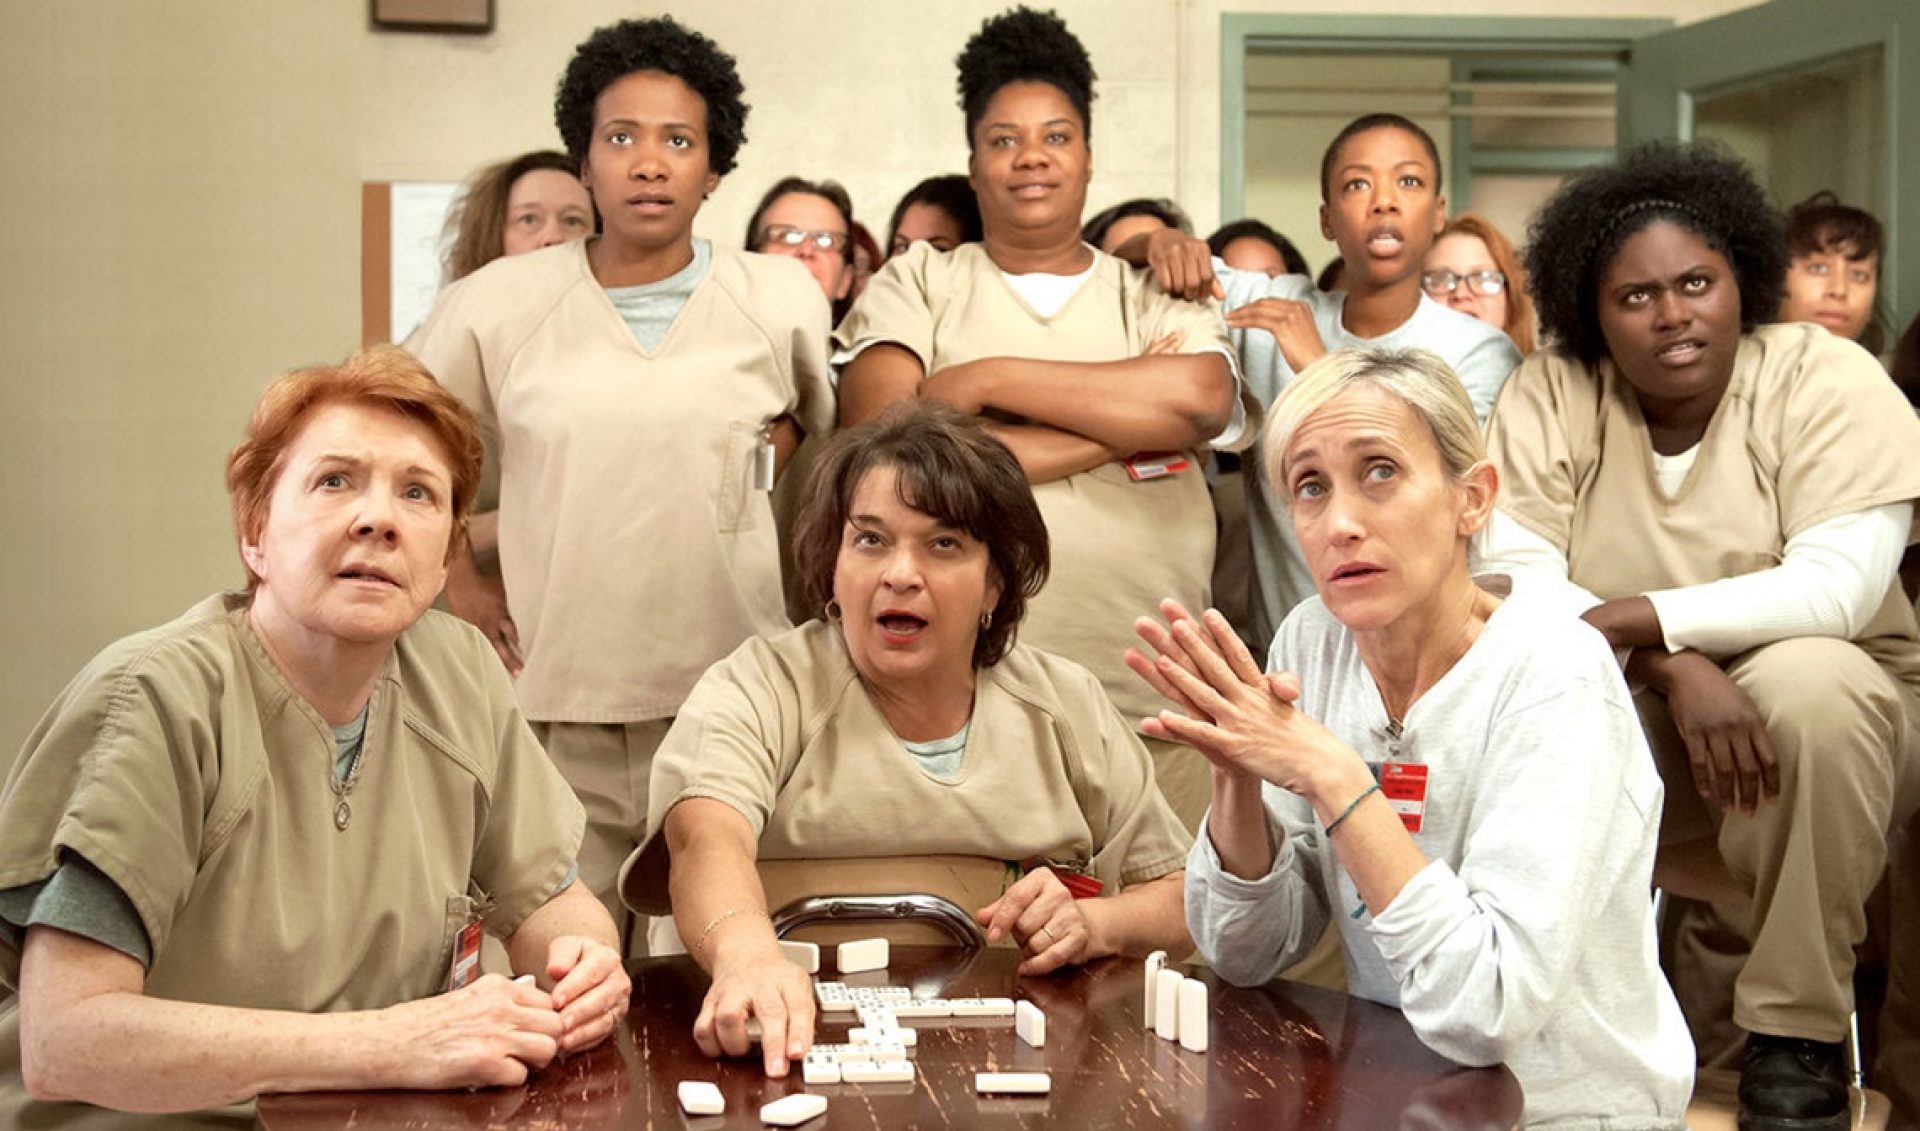 Third-Party Data Says ‘Orange Is The New Black’ Was Top Netflix Original Series Of 2016